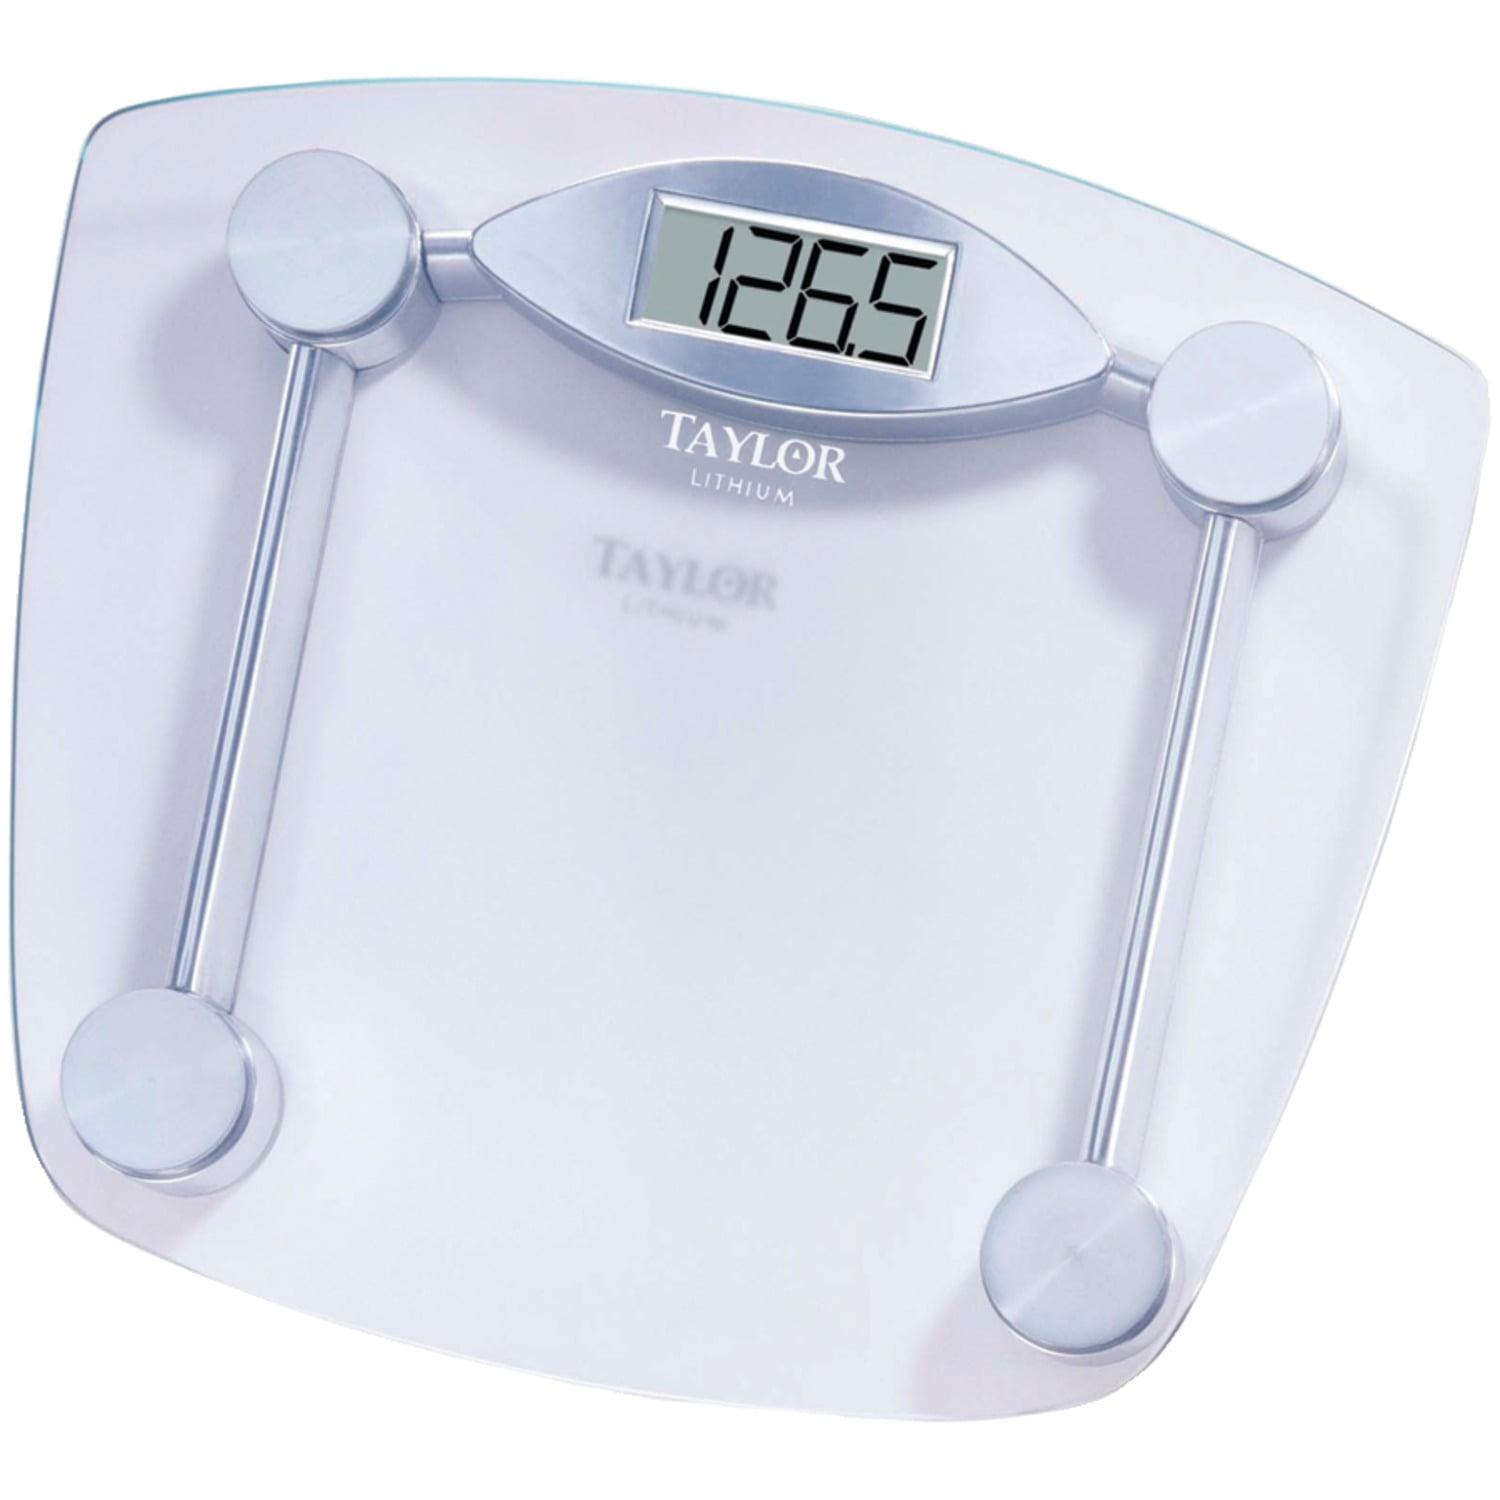 American Weigh Scales Bathroom Body Weight Scale Non-Slip Rubber Coated  Digital Large LCD Display 400LB Capacity